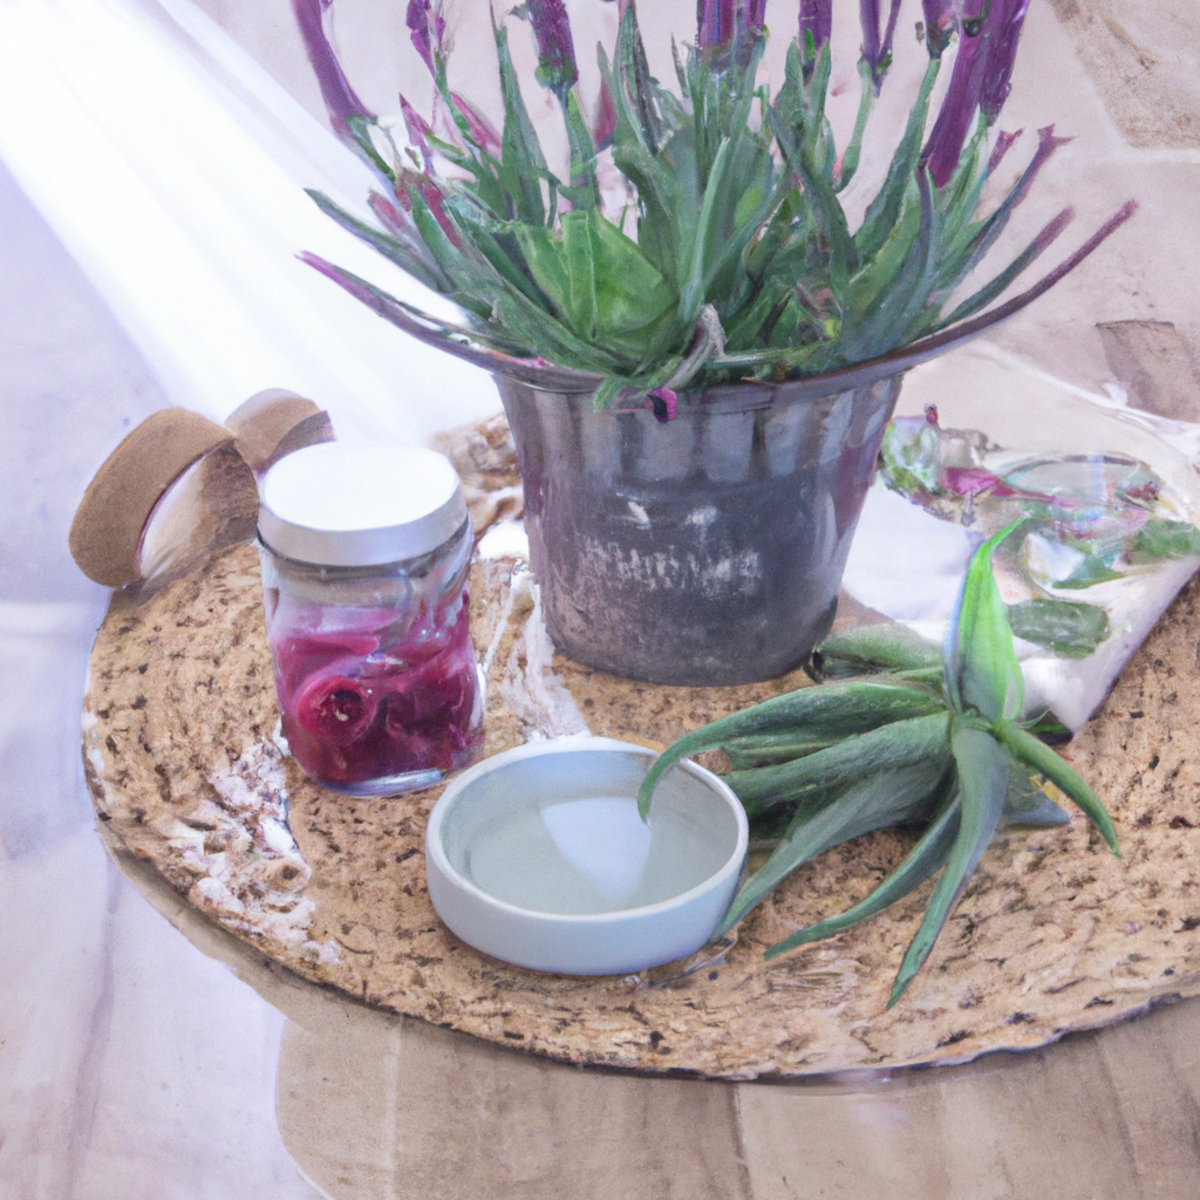 Wooden table adorned with natural remedies for rosacea management: chamomile flowers, essential oils, books, and aloe vera. Soft, inviting lighting.